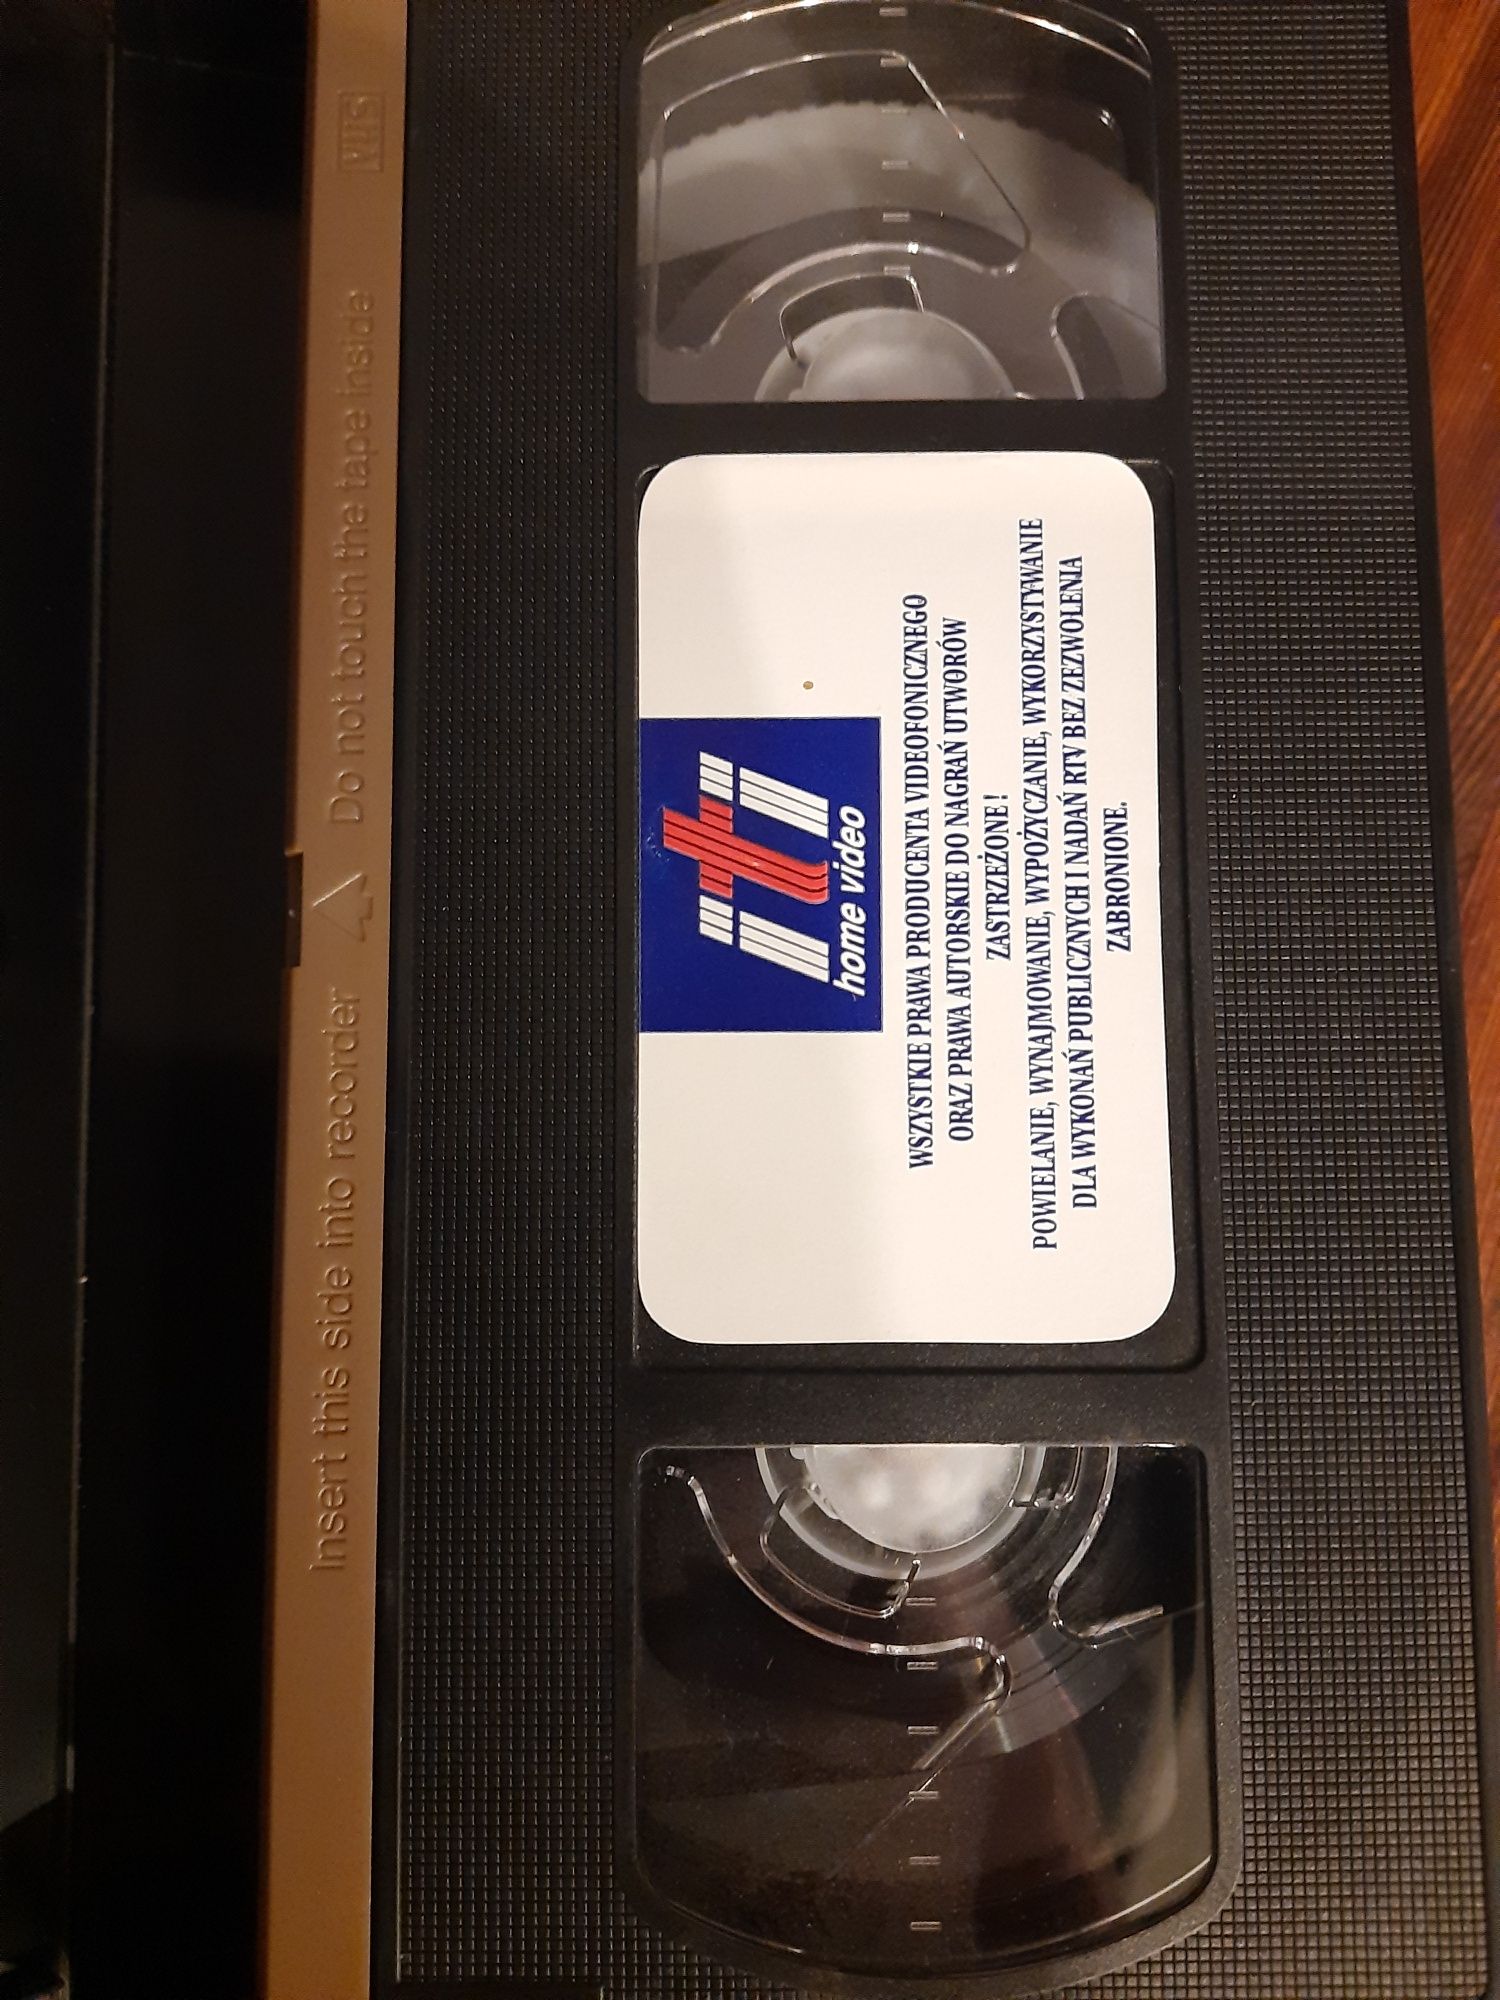 Mission Impossible - Tom Cruise kaseta VHS video